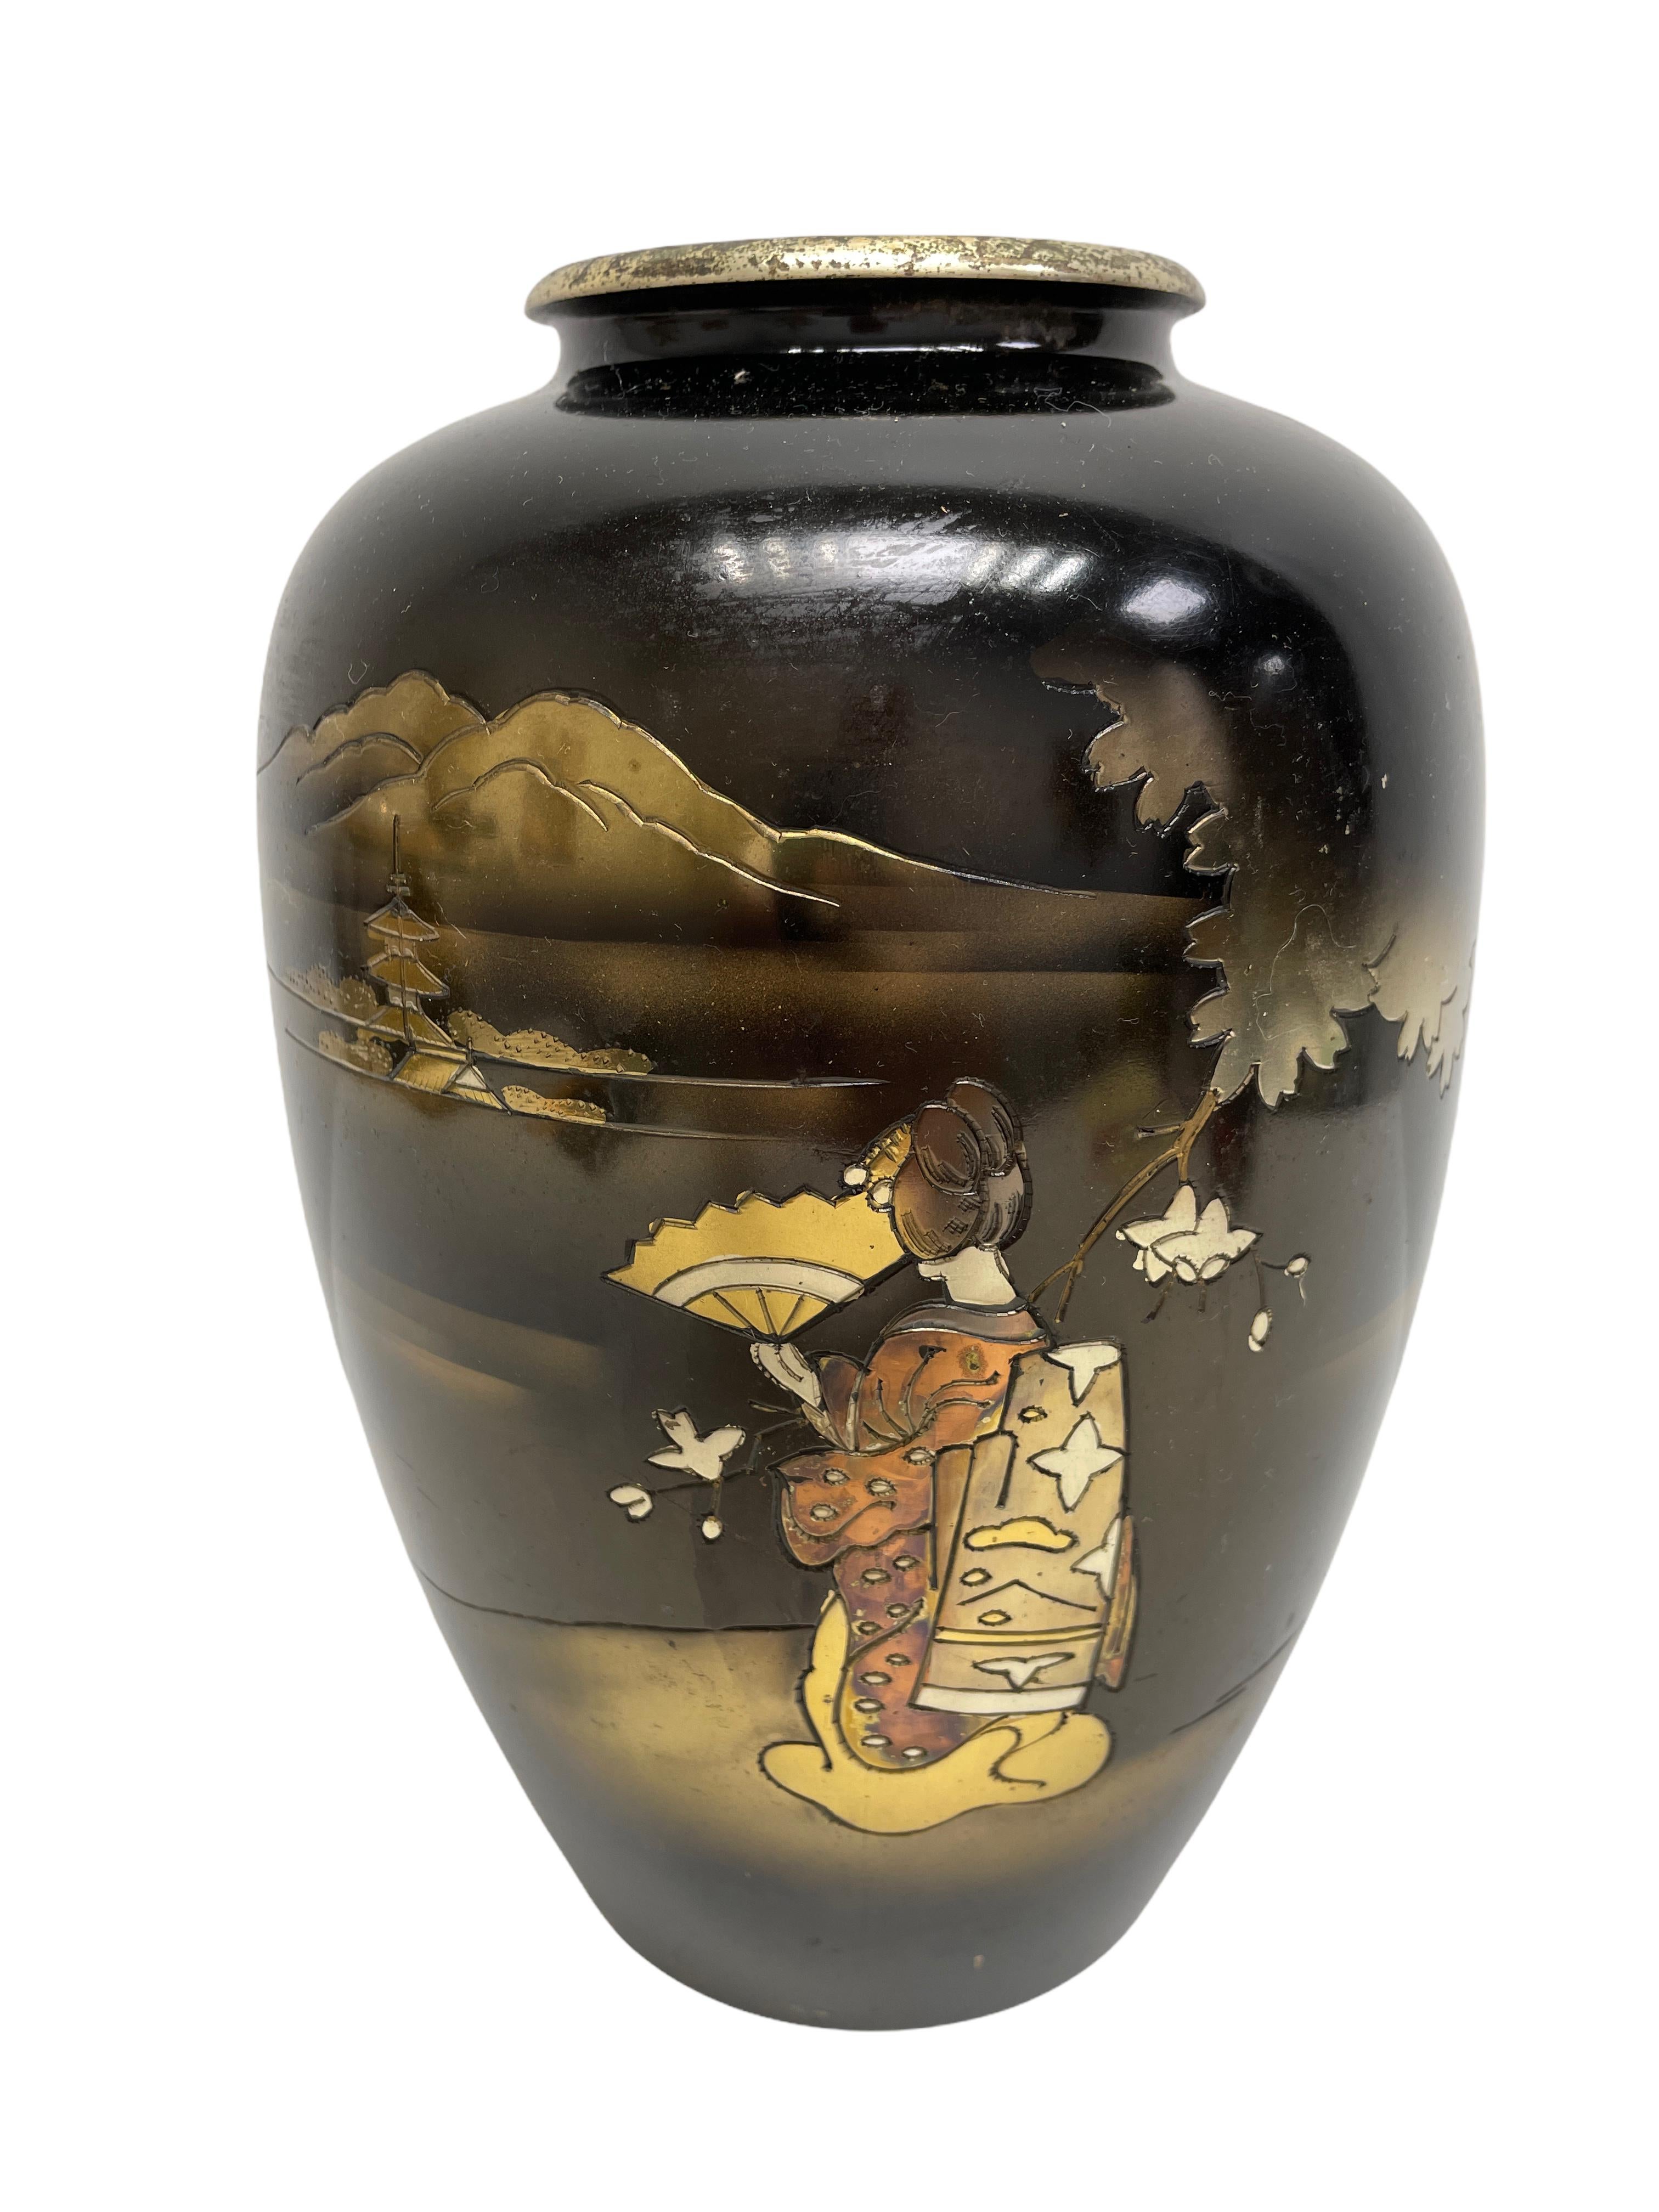 This exquisite vase has been madein Japan. It is signed by the Artist or manufactory. Made of Metal. A nice addition to any room.
  